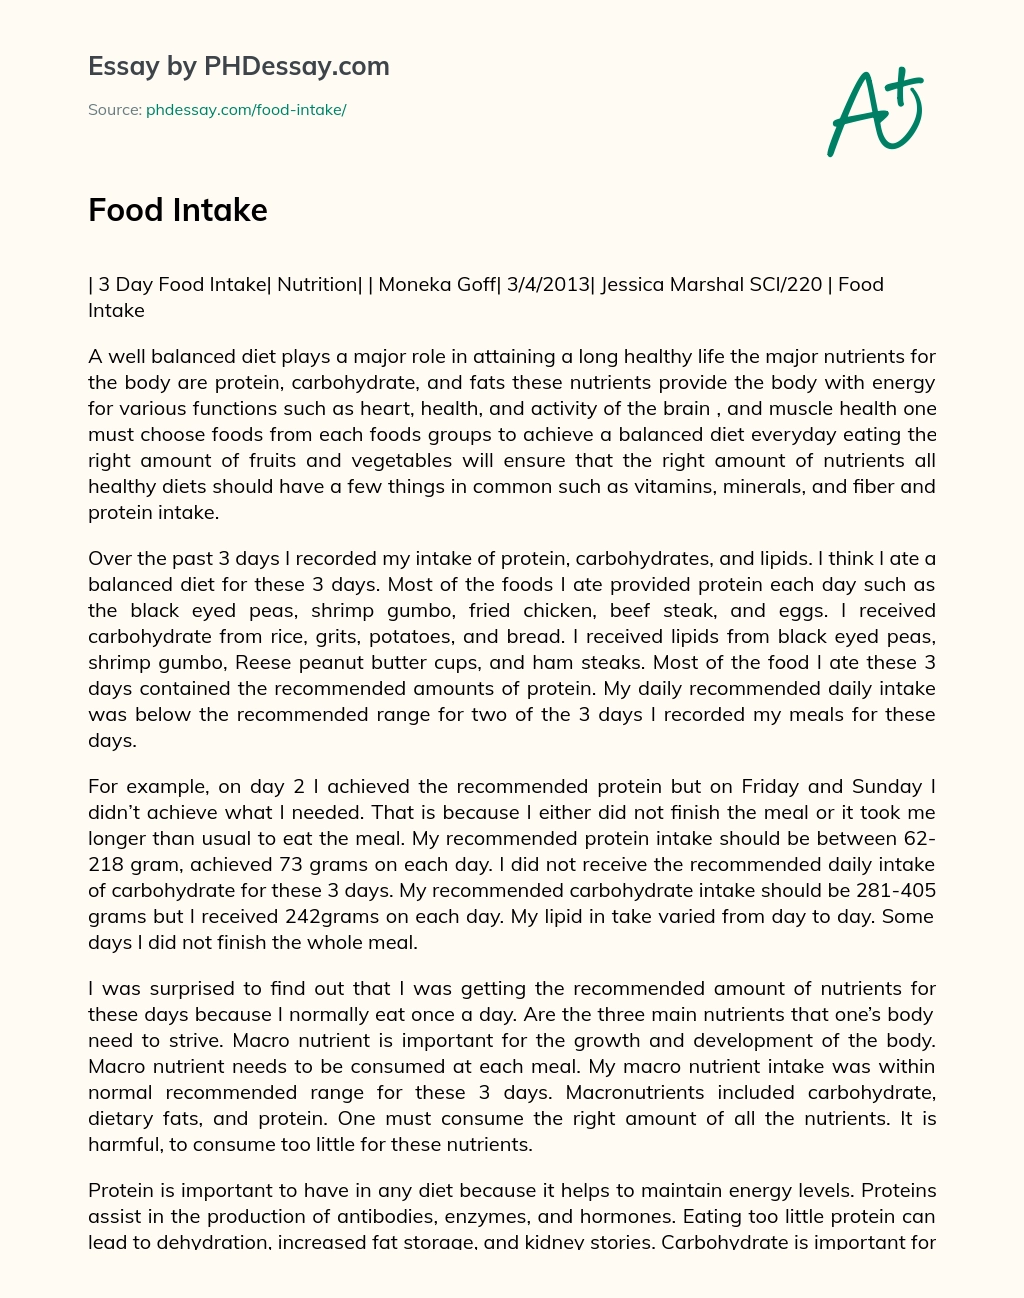 Importance of a Balanced Diet and Nutrient Intake essay